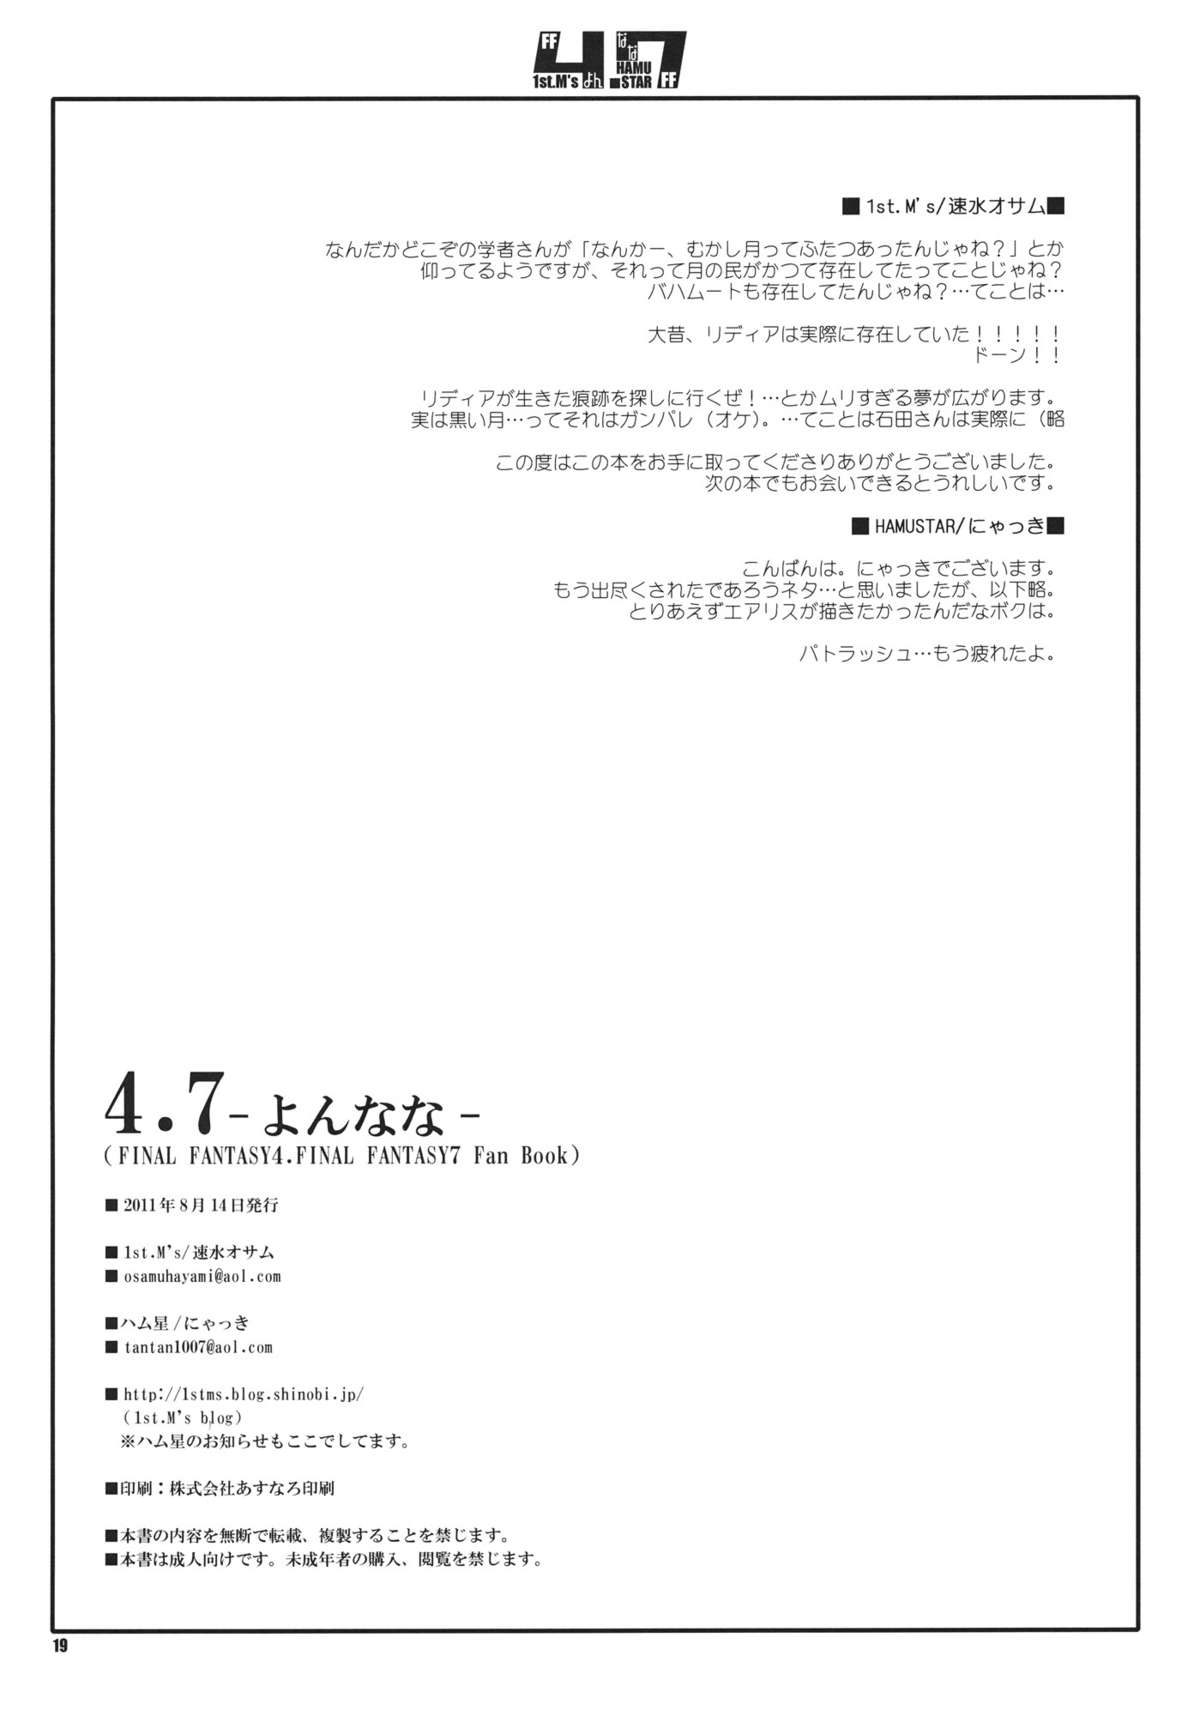 (C80) [1st.M's] 4.7 (Final Fantasy) page 19 full